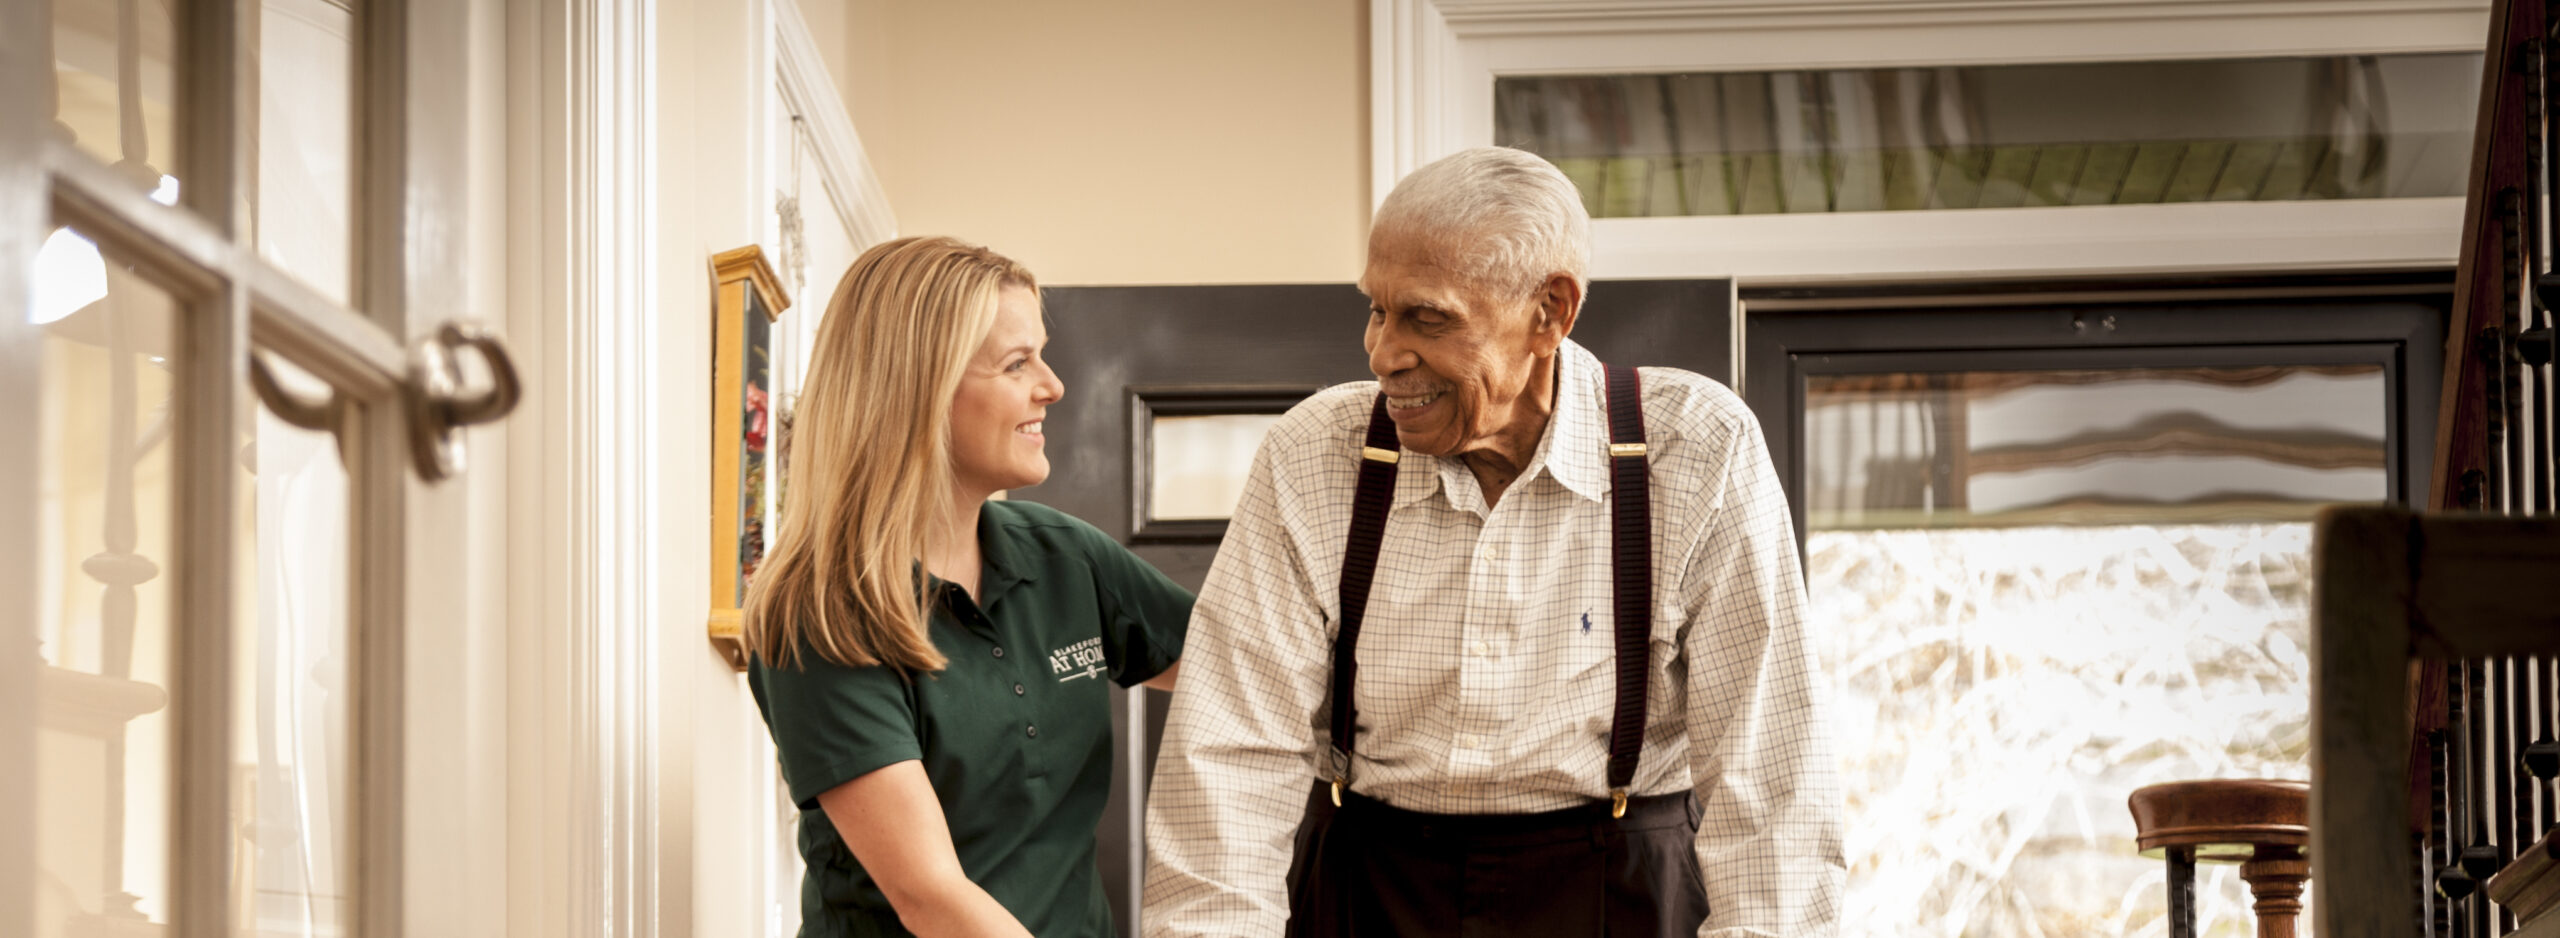 At home caregiver helping senior with mobility assistance.